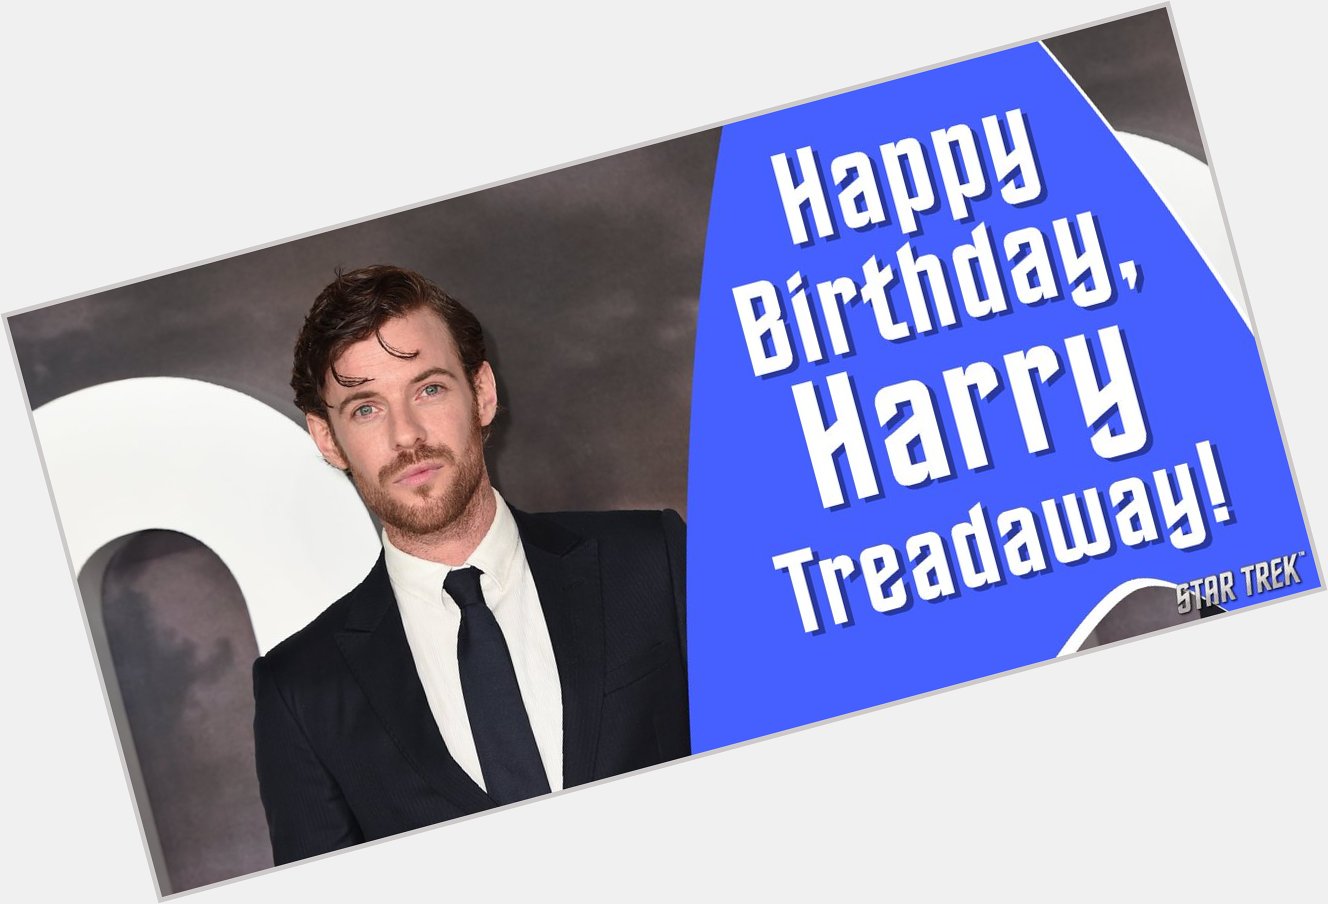 Join us in wishing a very Happy Birthday to Harry Treadaway!   